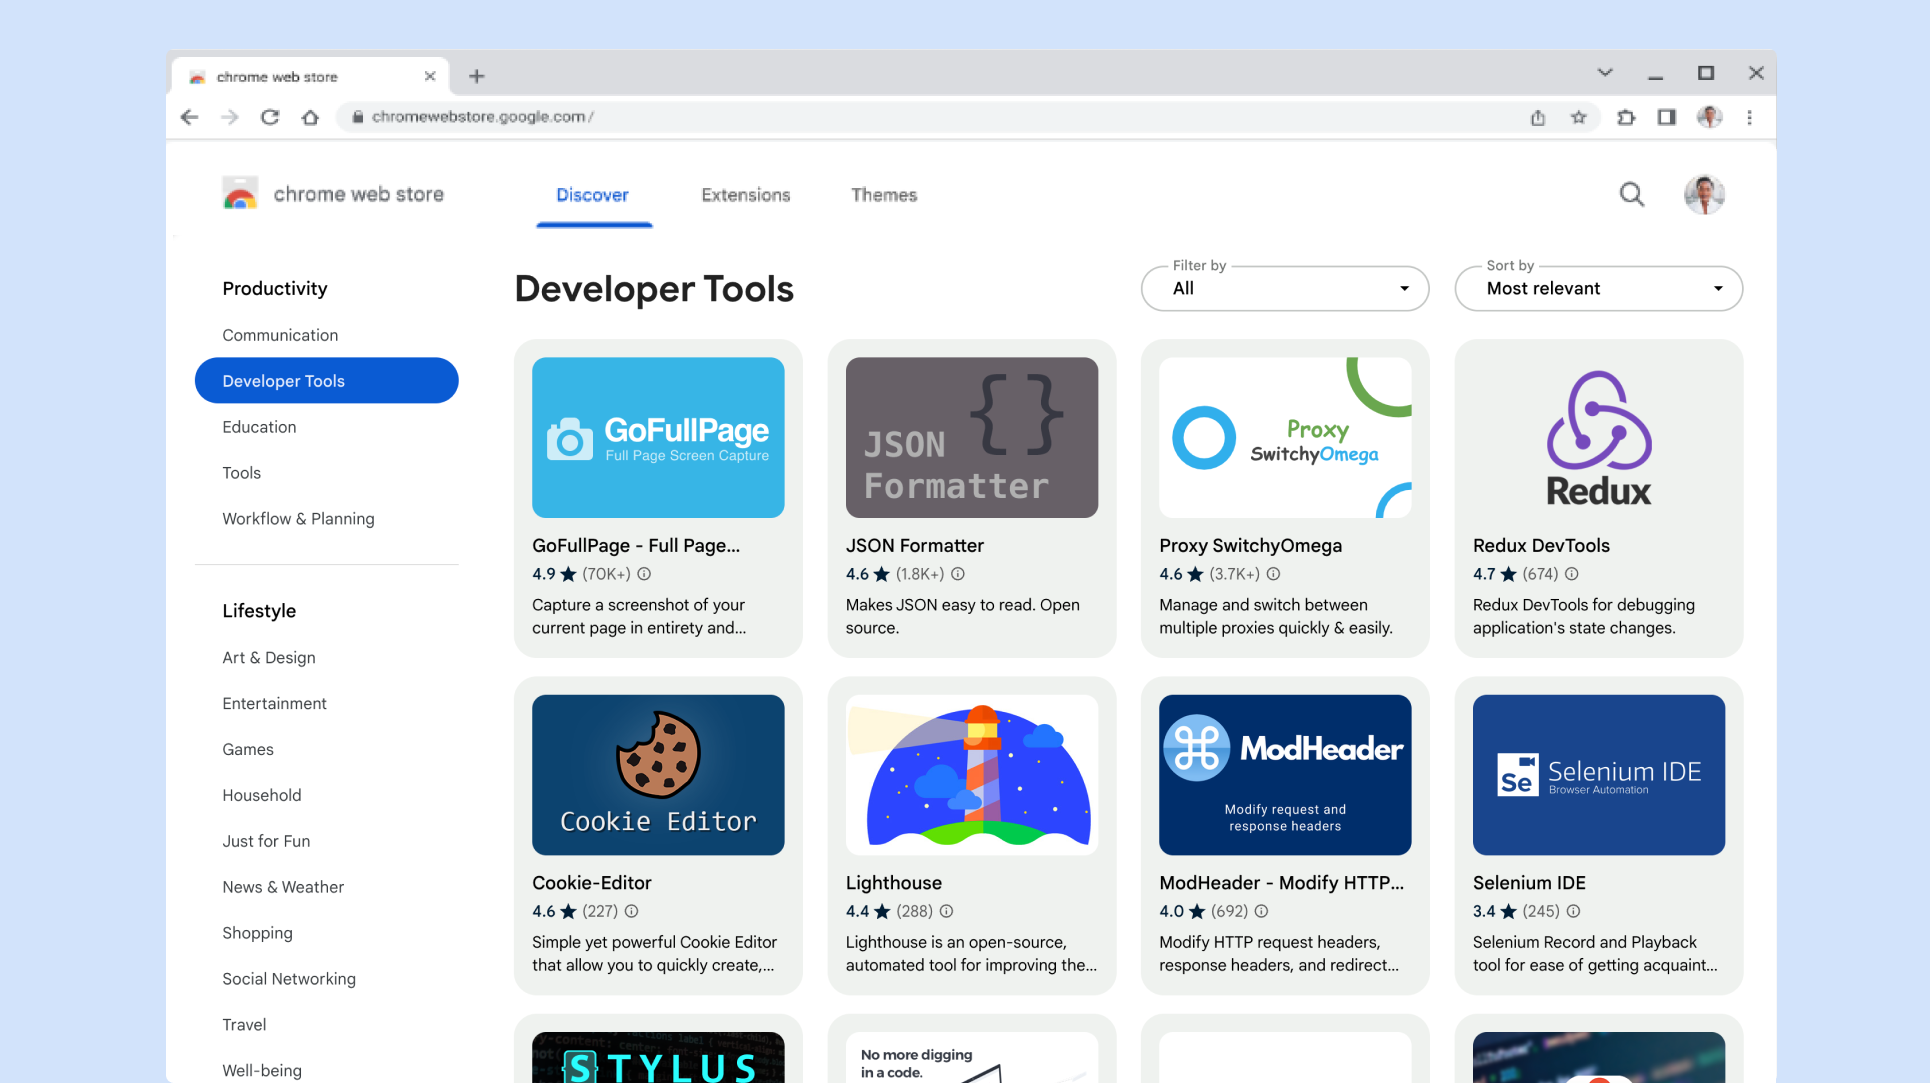 Image of Chrome Web Store in Chrome browser that shows the list of extensions in the "Developer Tools" category.